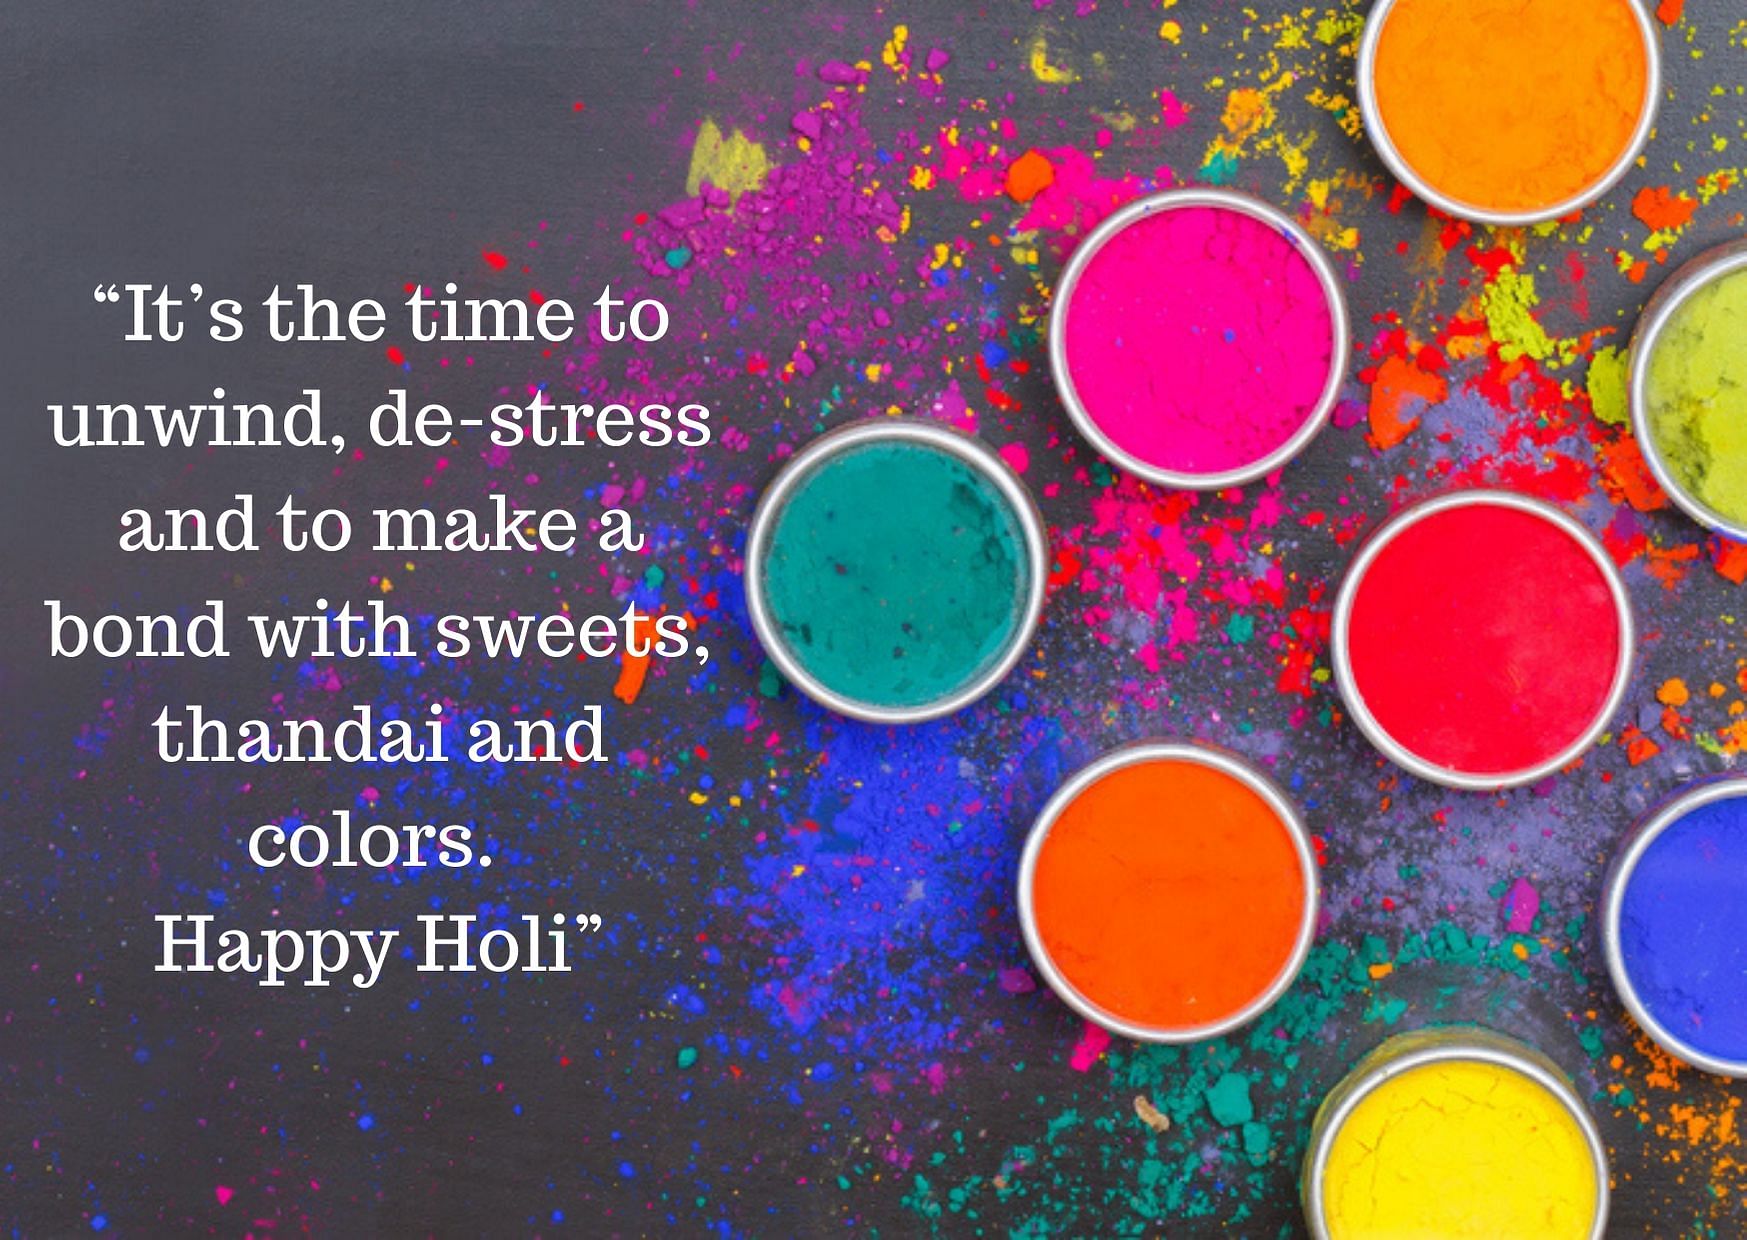 Happy Holi 2020 Wishes, Images, Quotes and Messages Send these